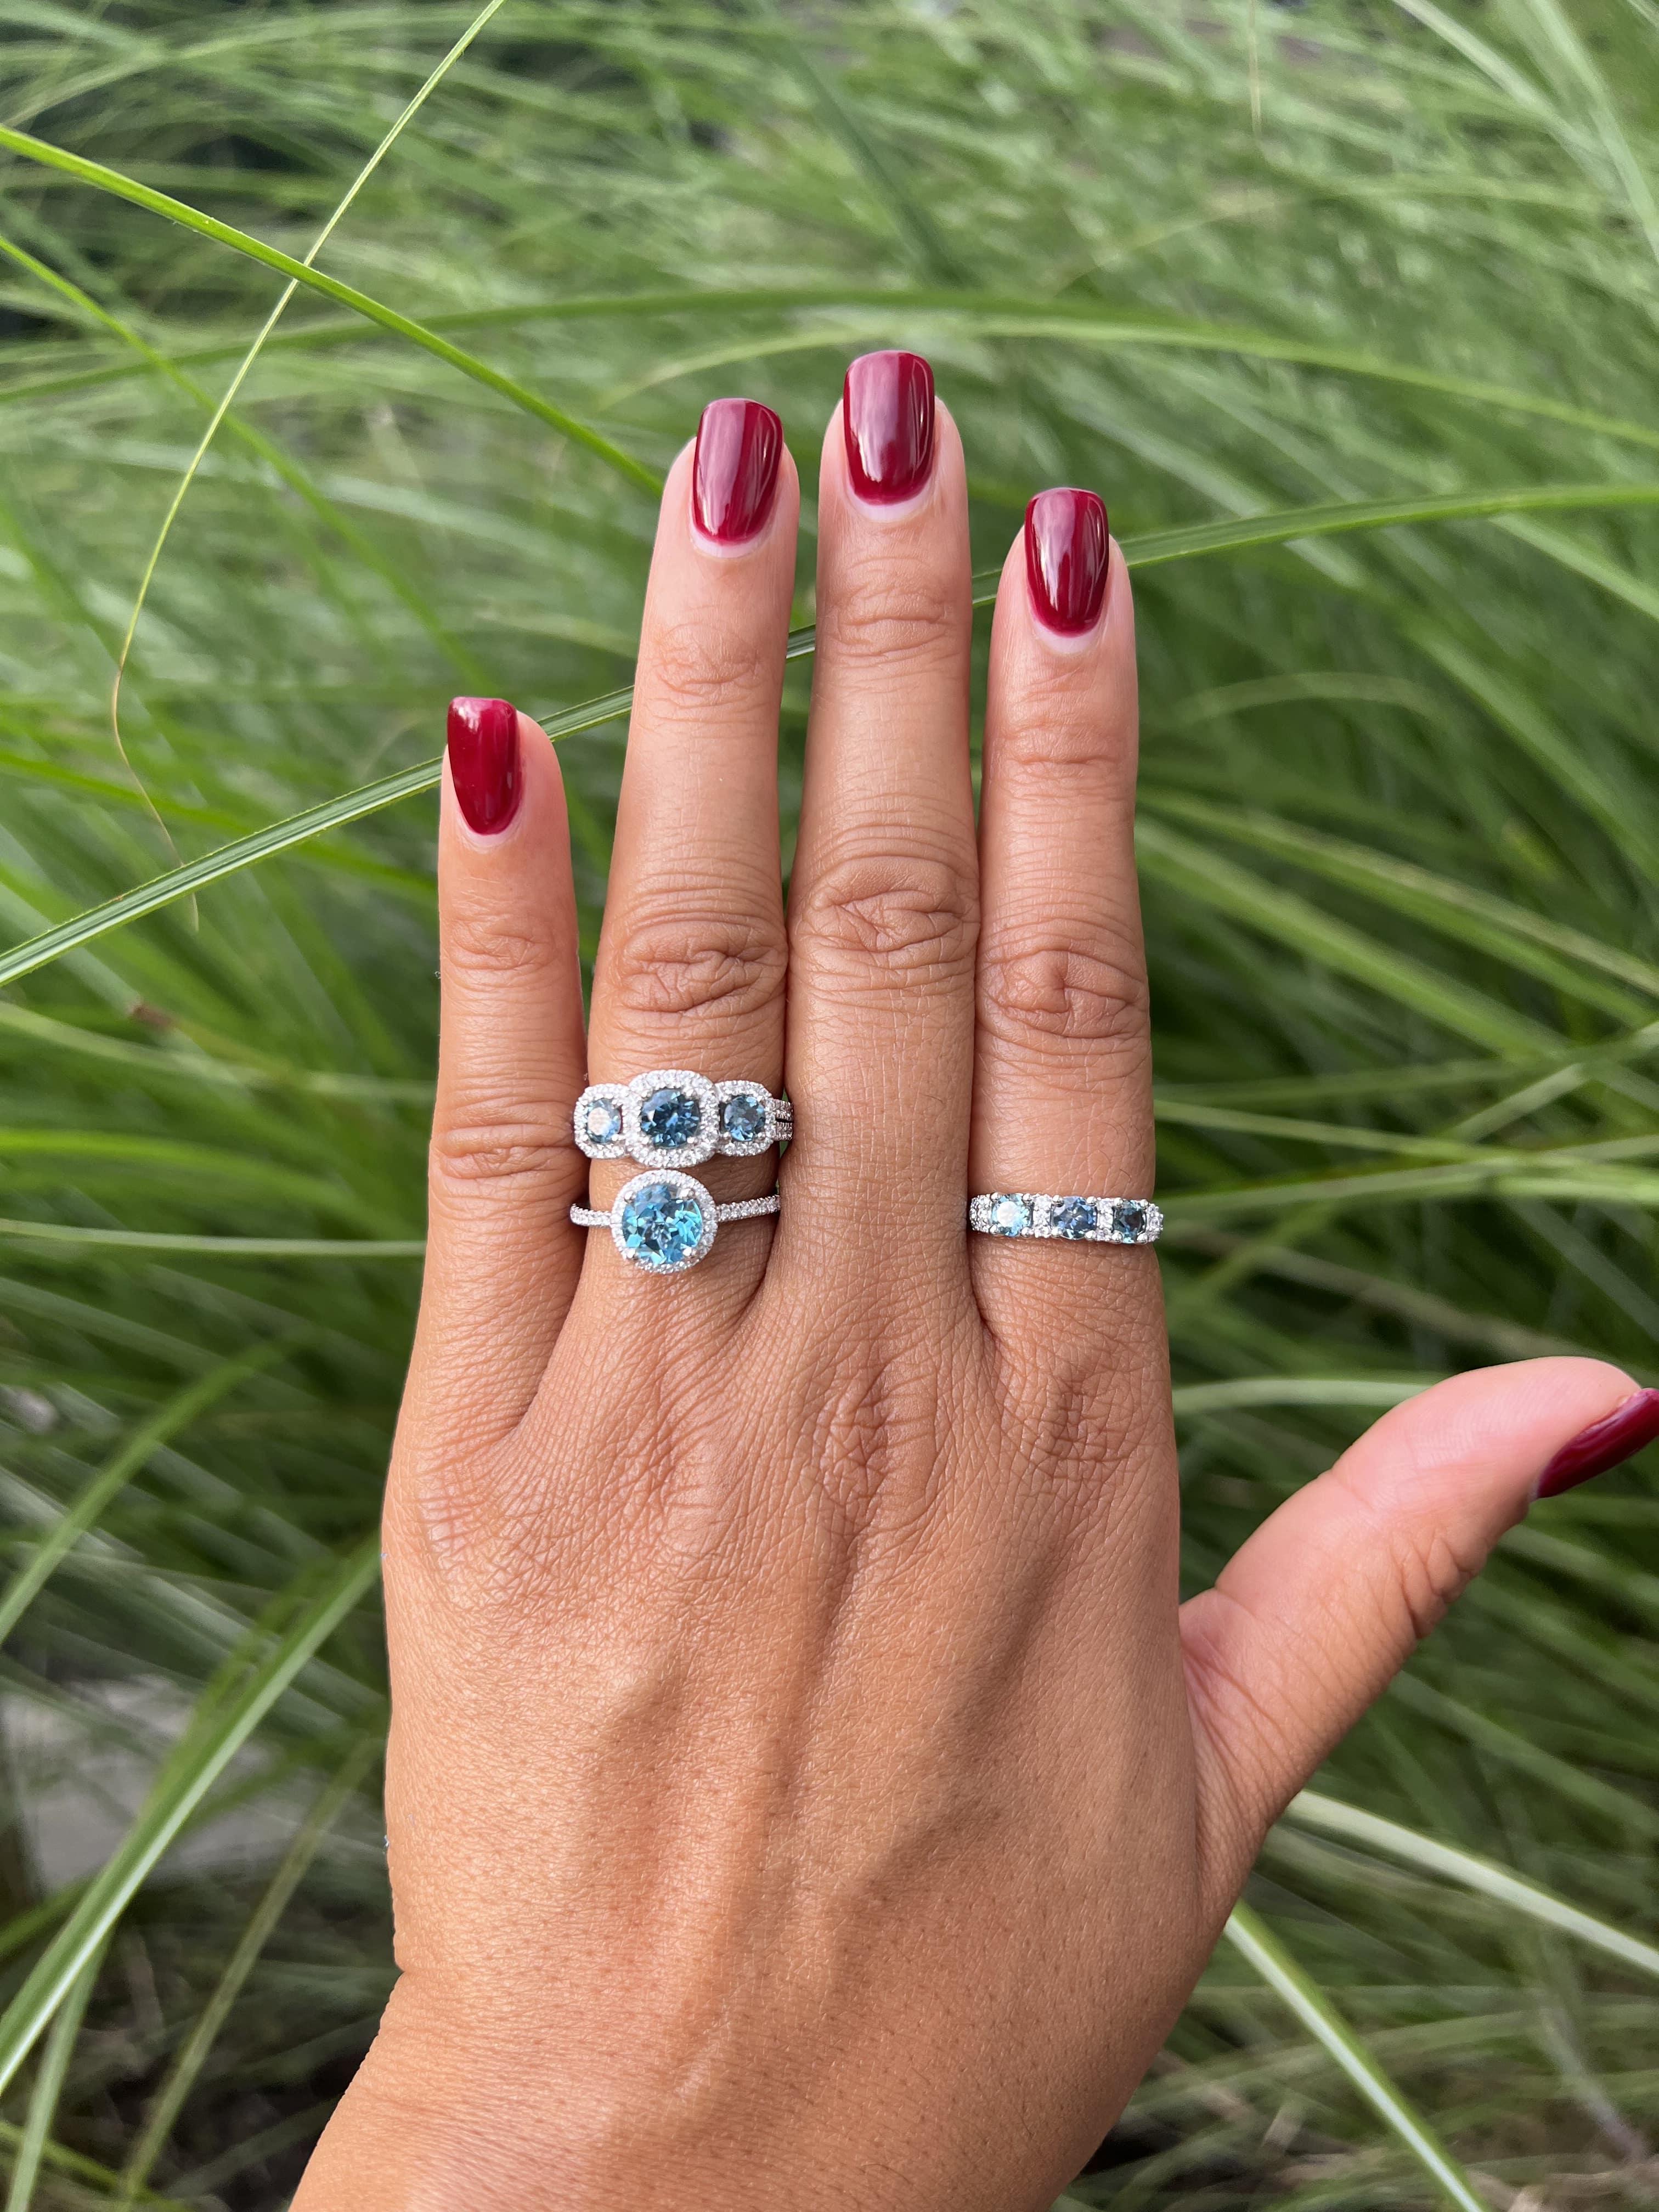 A beautiful fashion ring that can be a wedding ring or anniversary ring. This ring features a round blue topaz with a diamond halo and diamonds on the shank.

14K Yellow Gold Blue Topaz Ring with Diamonds
- Diamond weight: 0.27 ct total weight
-